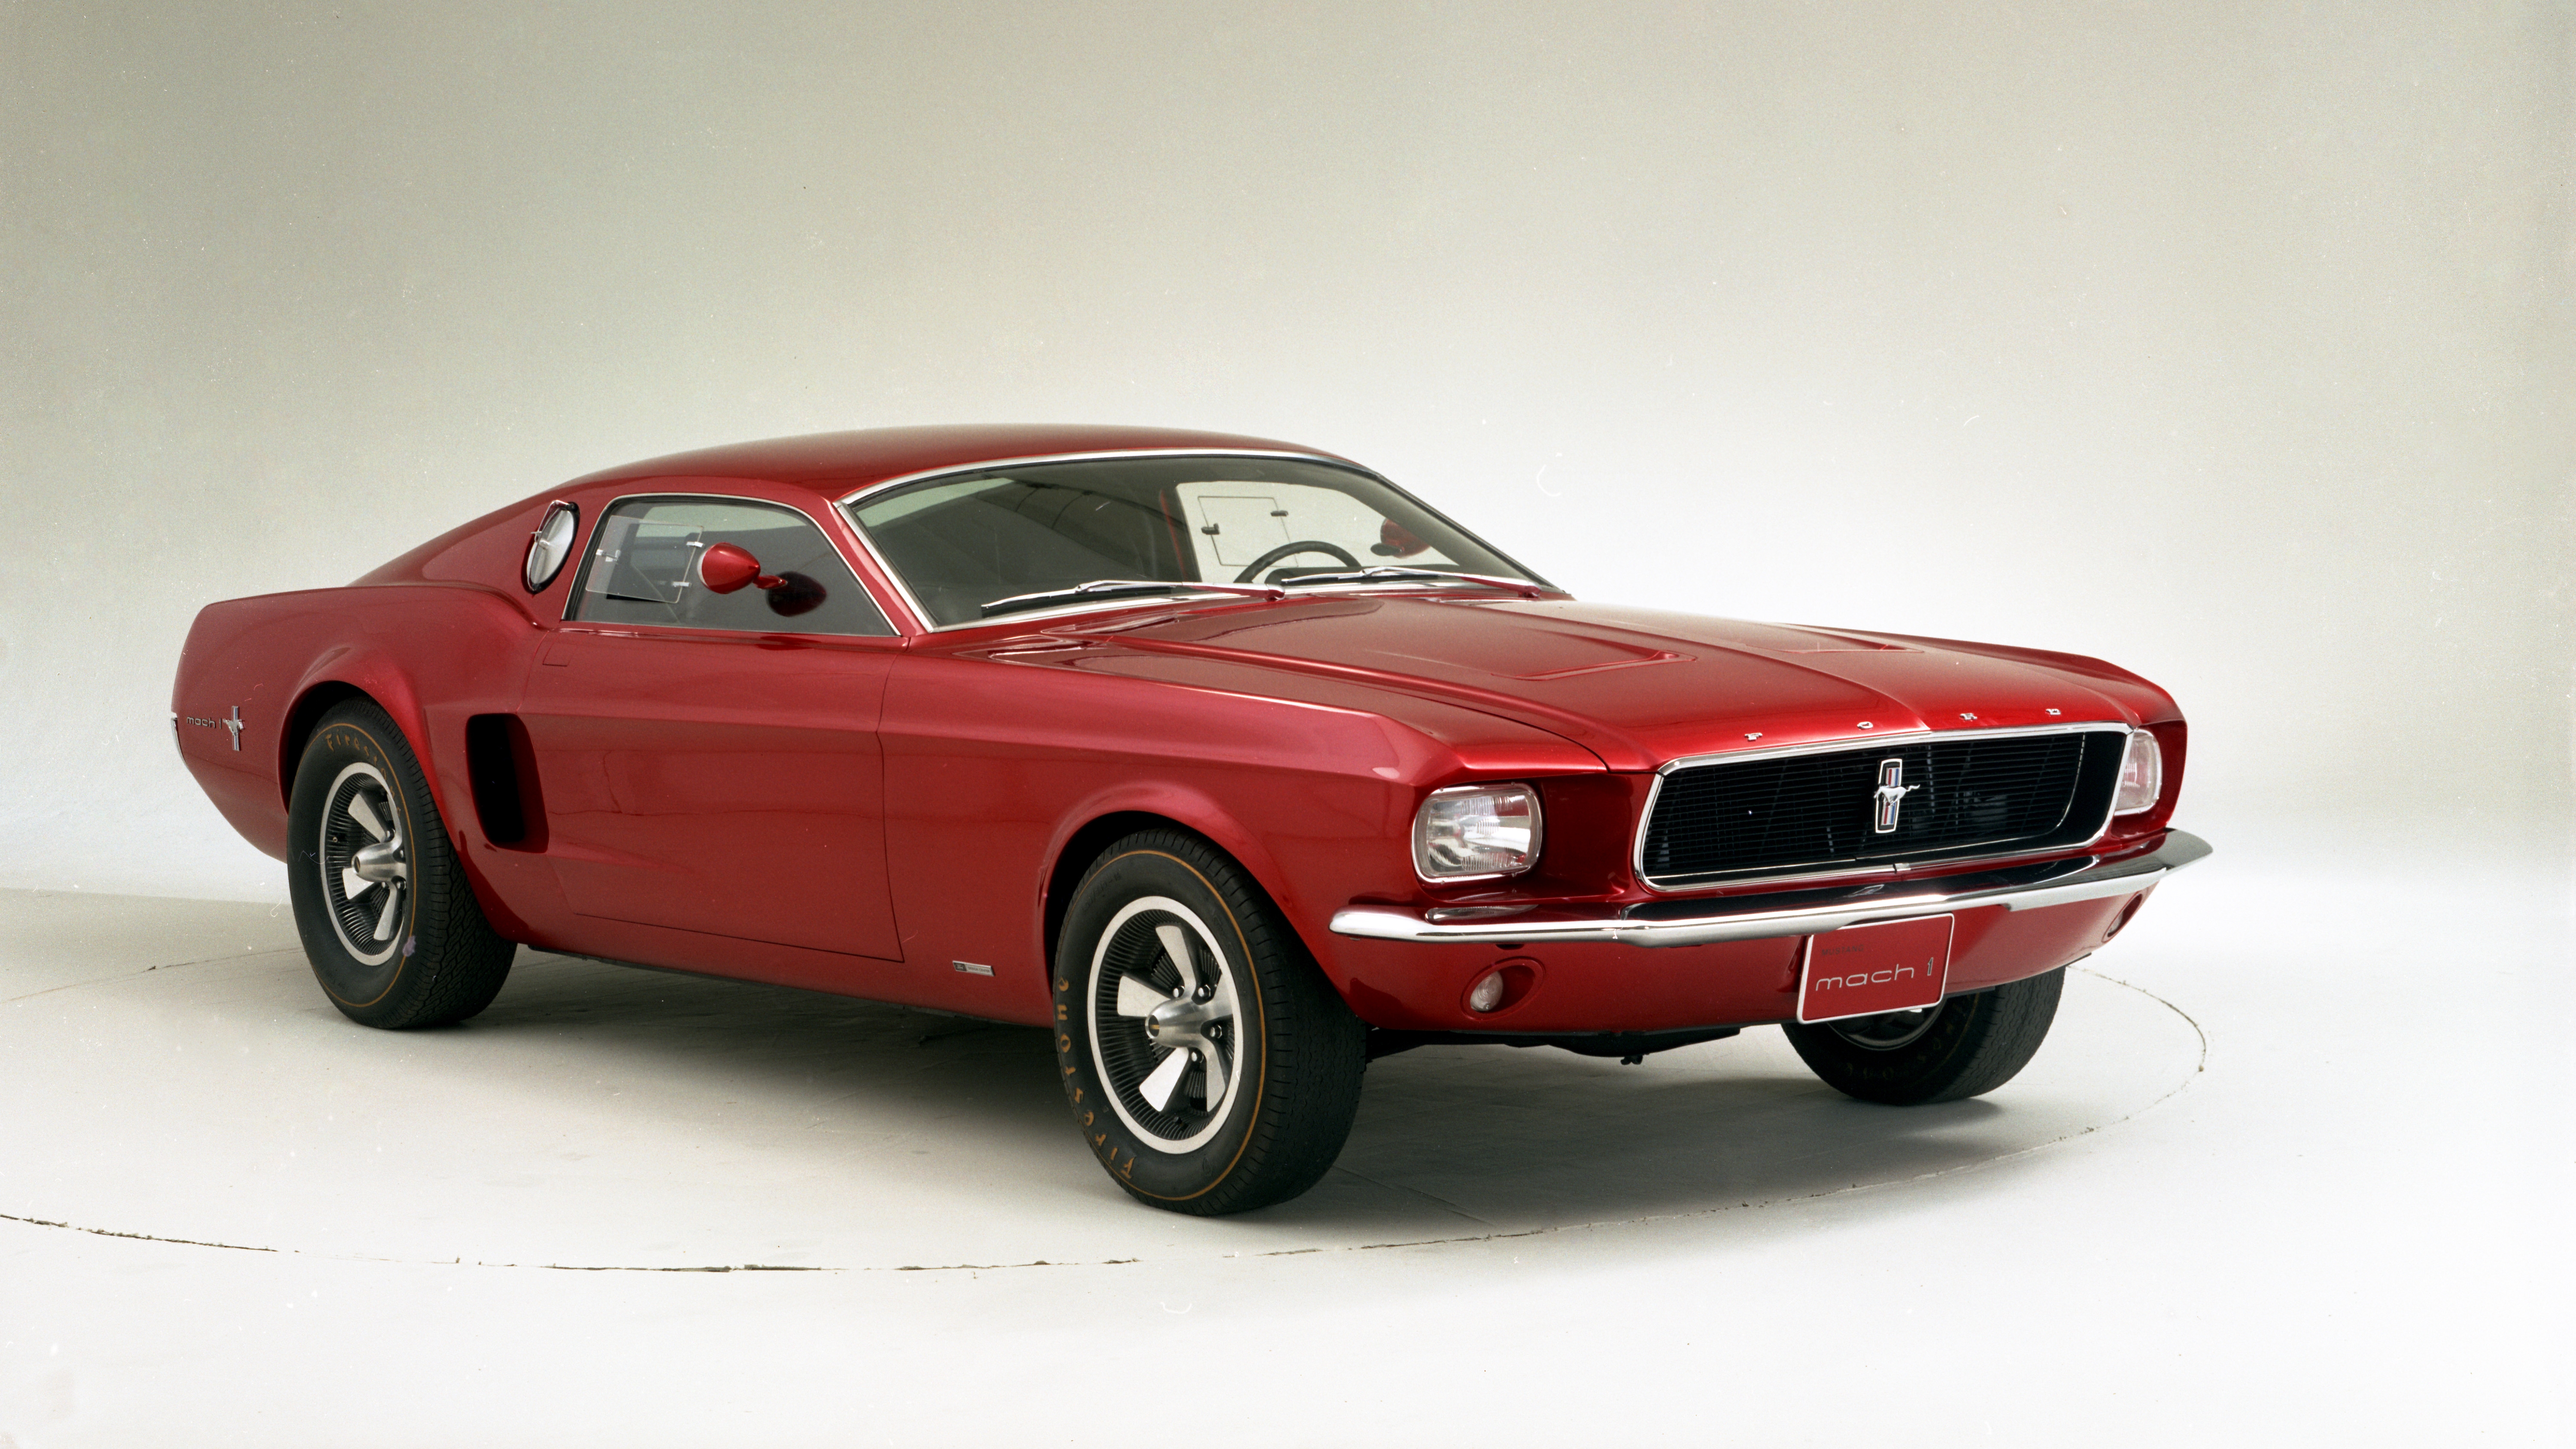 Ford Mustang Mach 1 Muscle Car Red Car 6000x3375